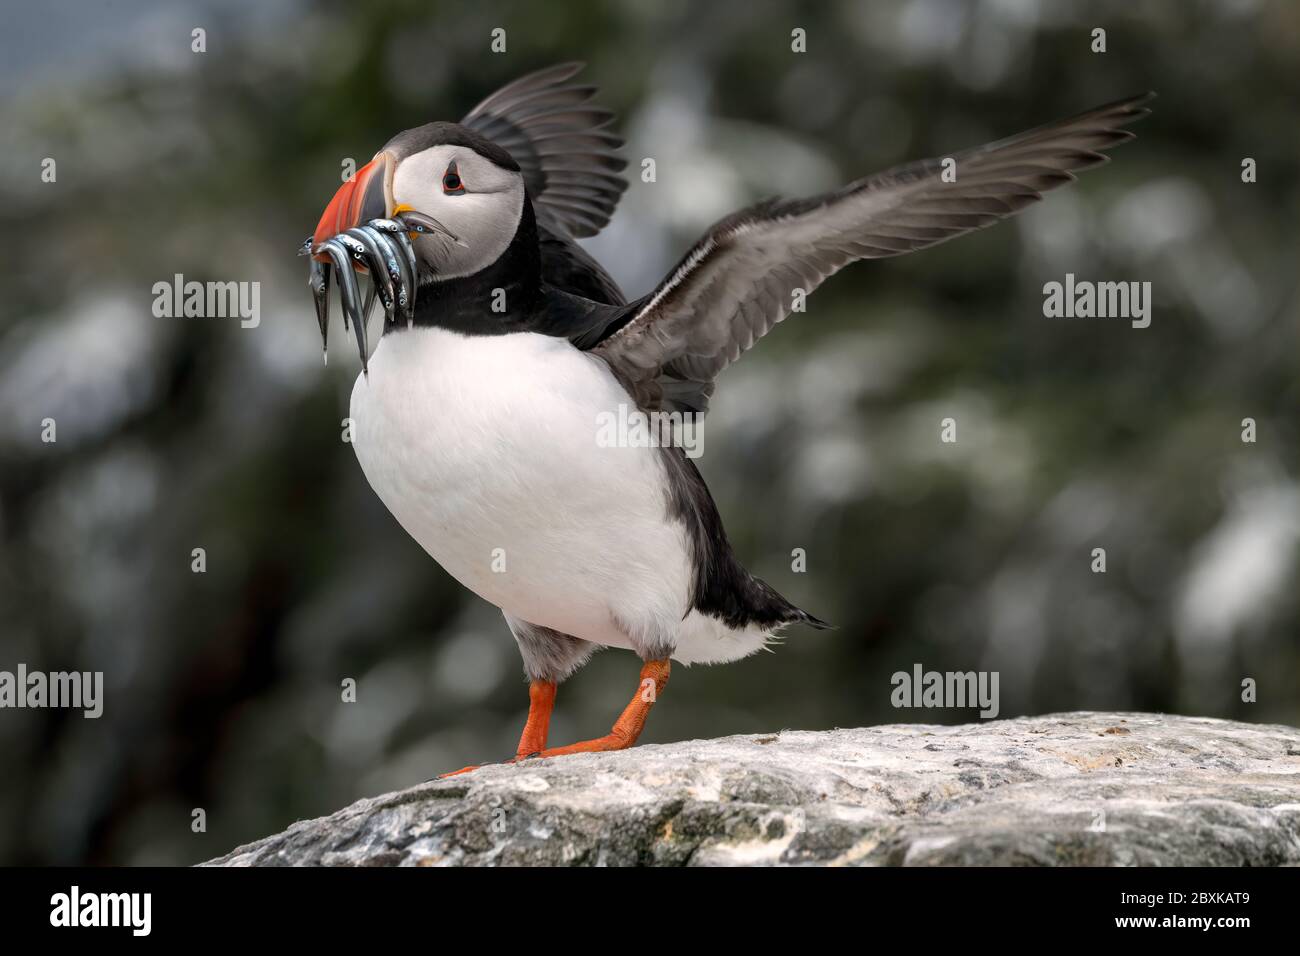 Puffin standing on a rock with sand eels in its mouth flapping its wings. The breeding colony can be seen in the background. Stock Photo